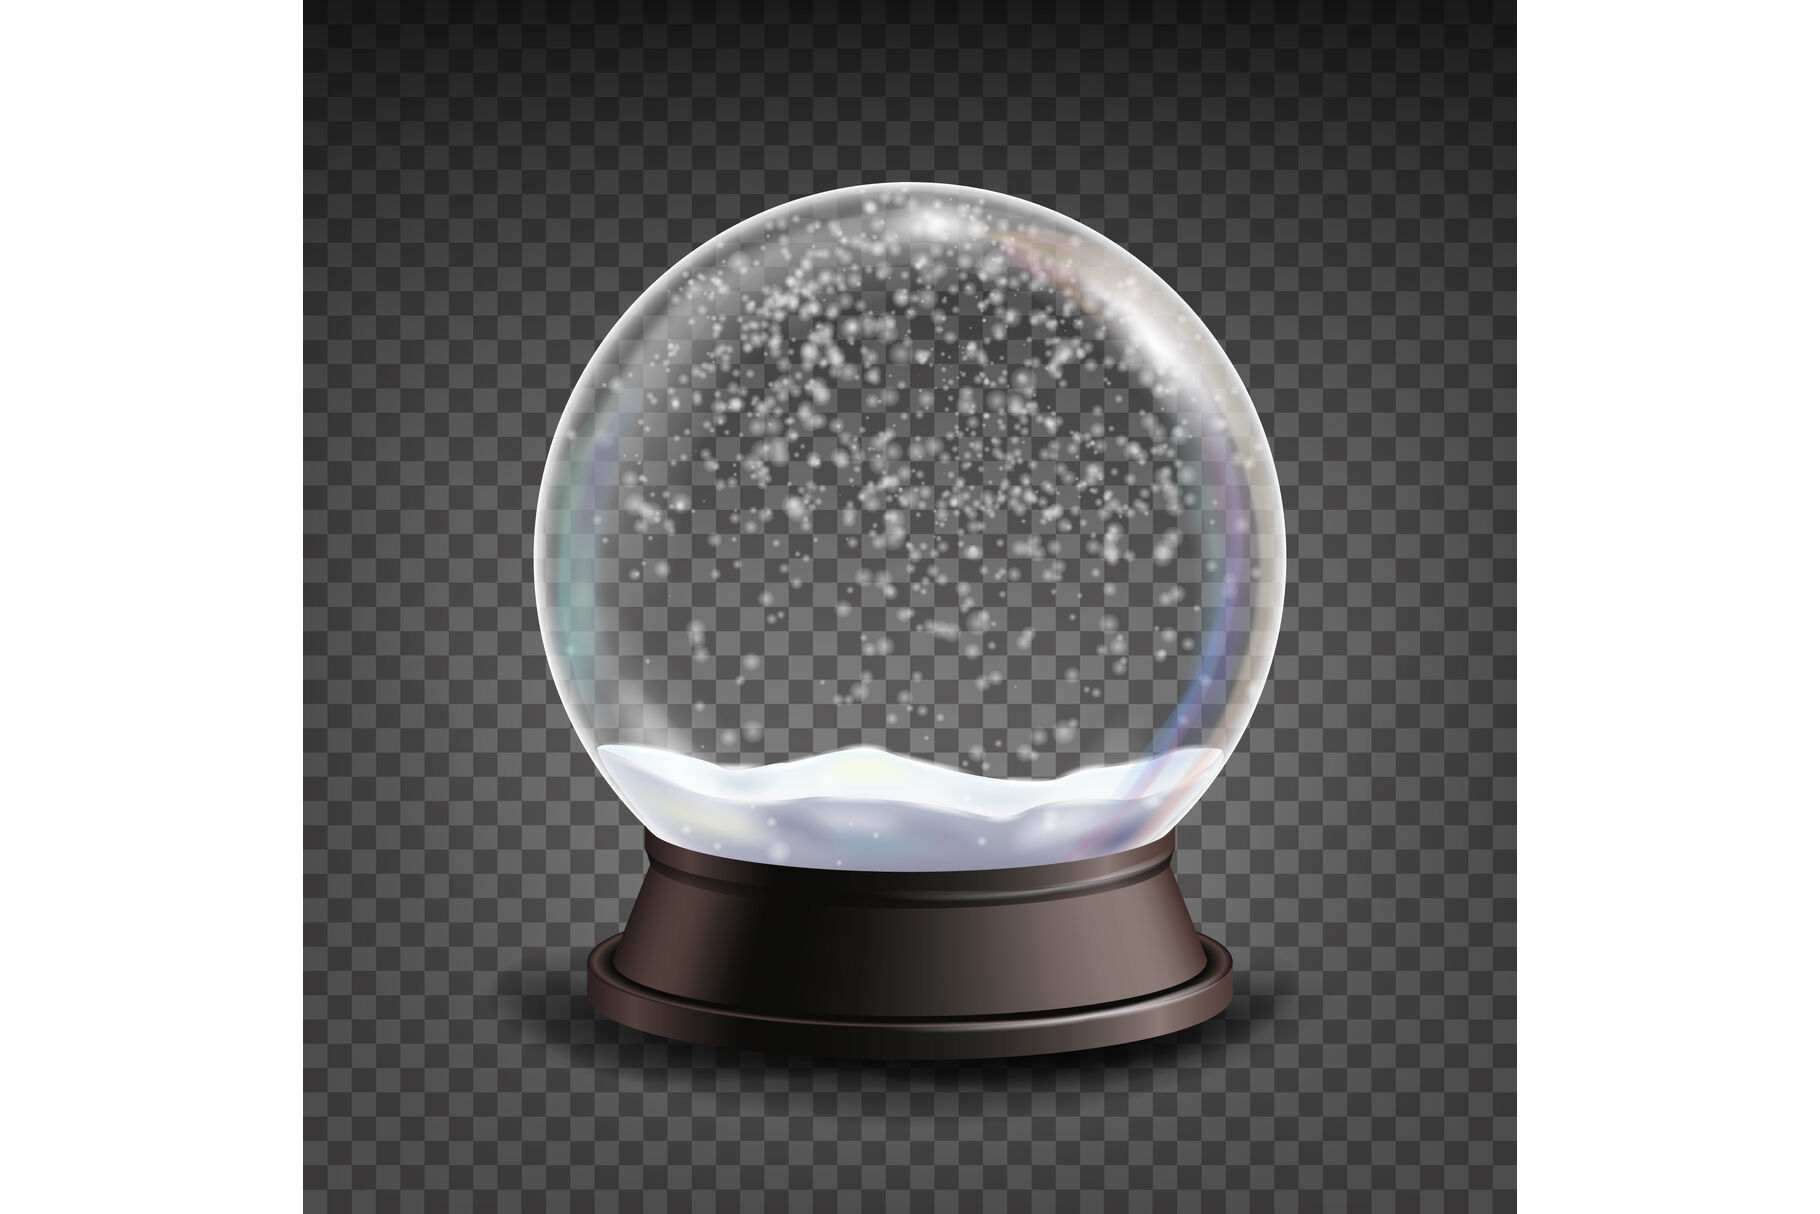 Snow Globe Realistic Vector Realisitc 3d Snow Globe Toy Winter Xmas Design Element Isolated On Transparent Background Illustration By Pikepicture Thehungryjpeg Com